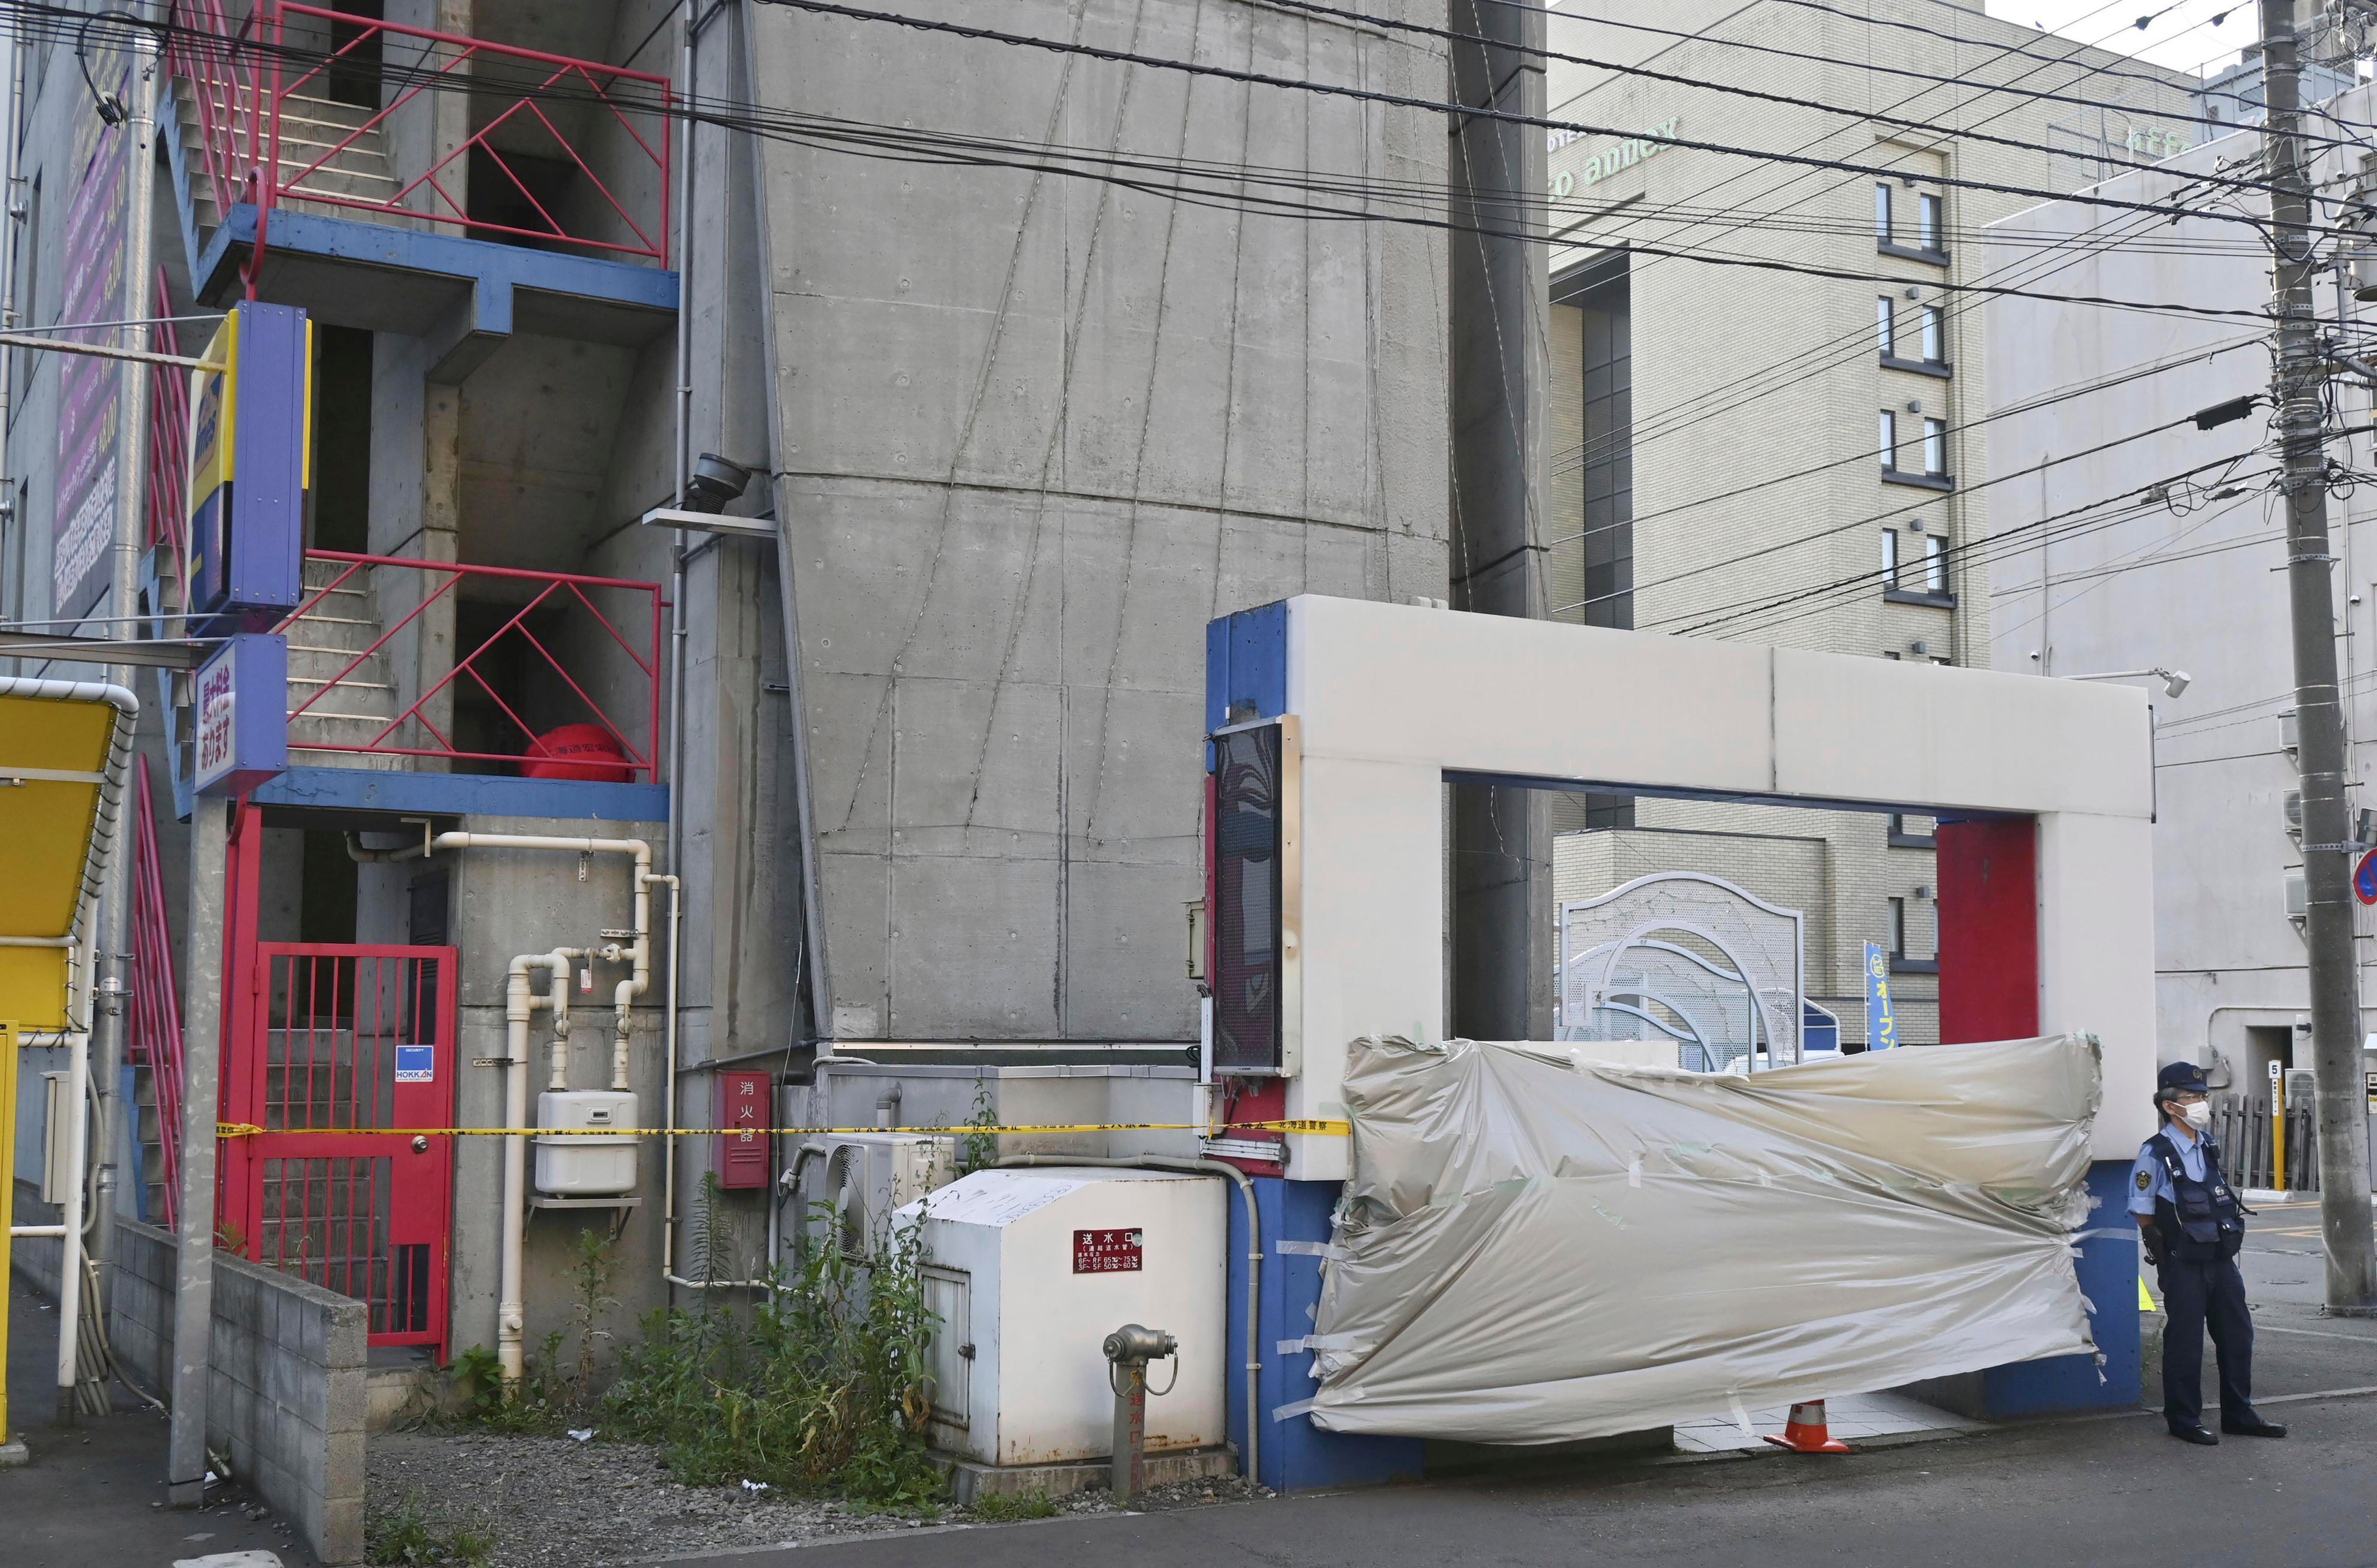 Hotel sealed in Sapporo, northern Japan after headless body of a man was discovered